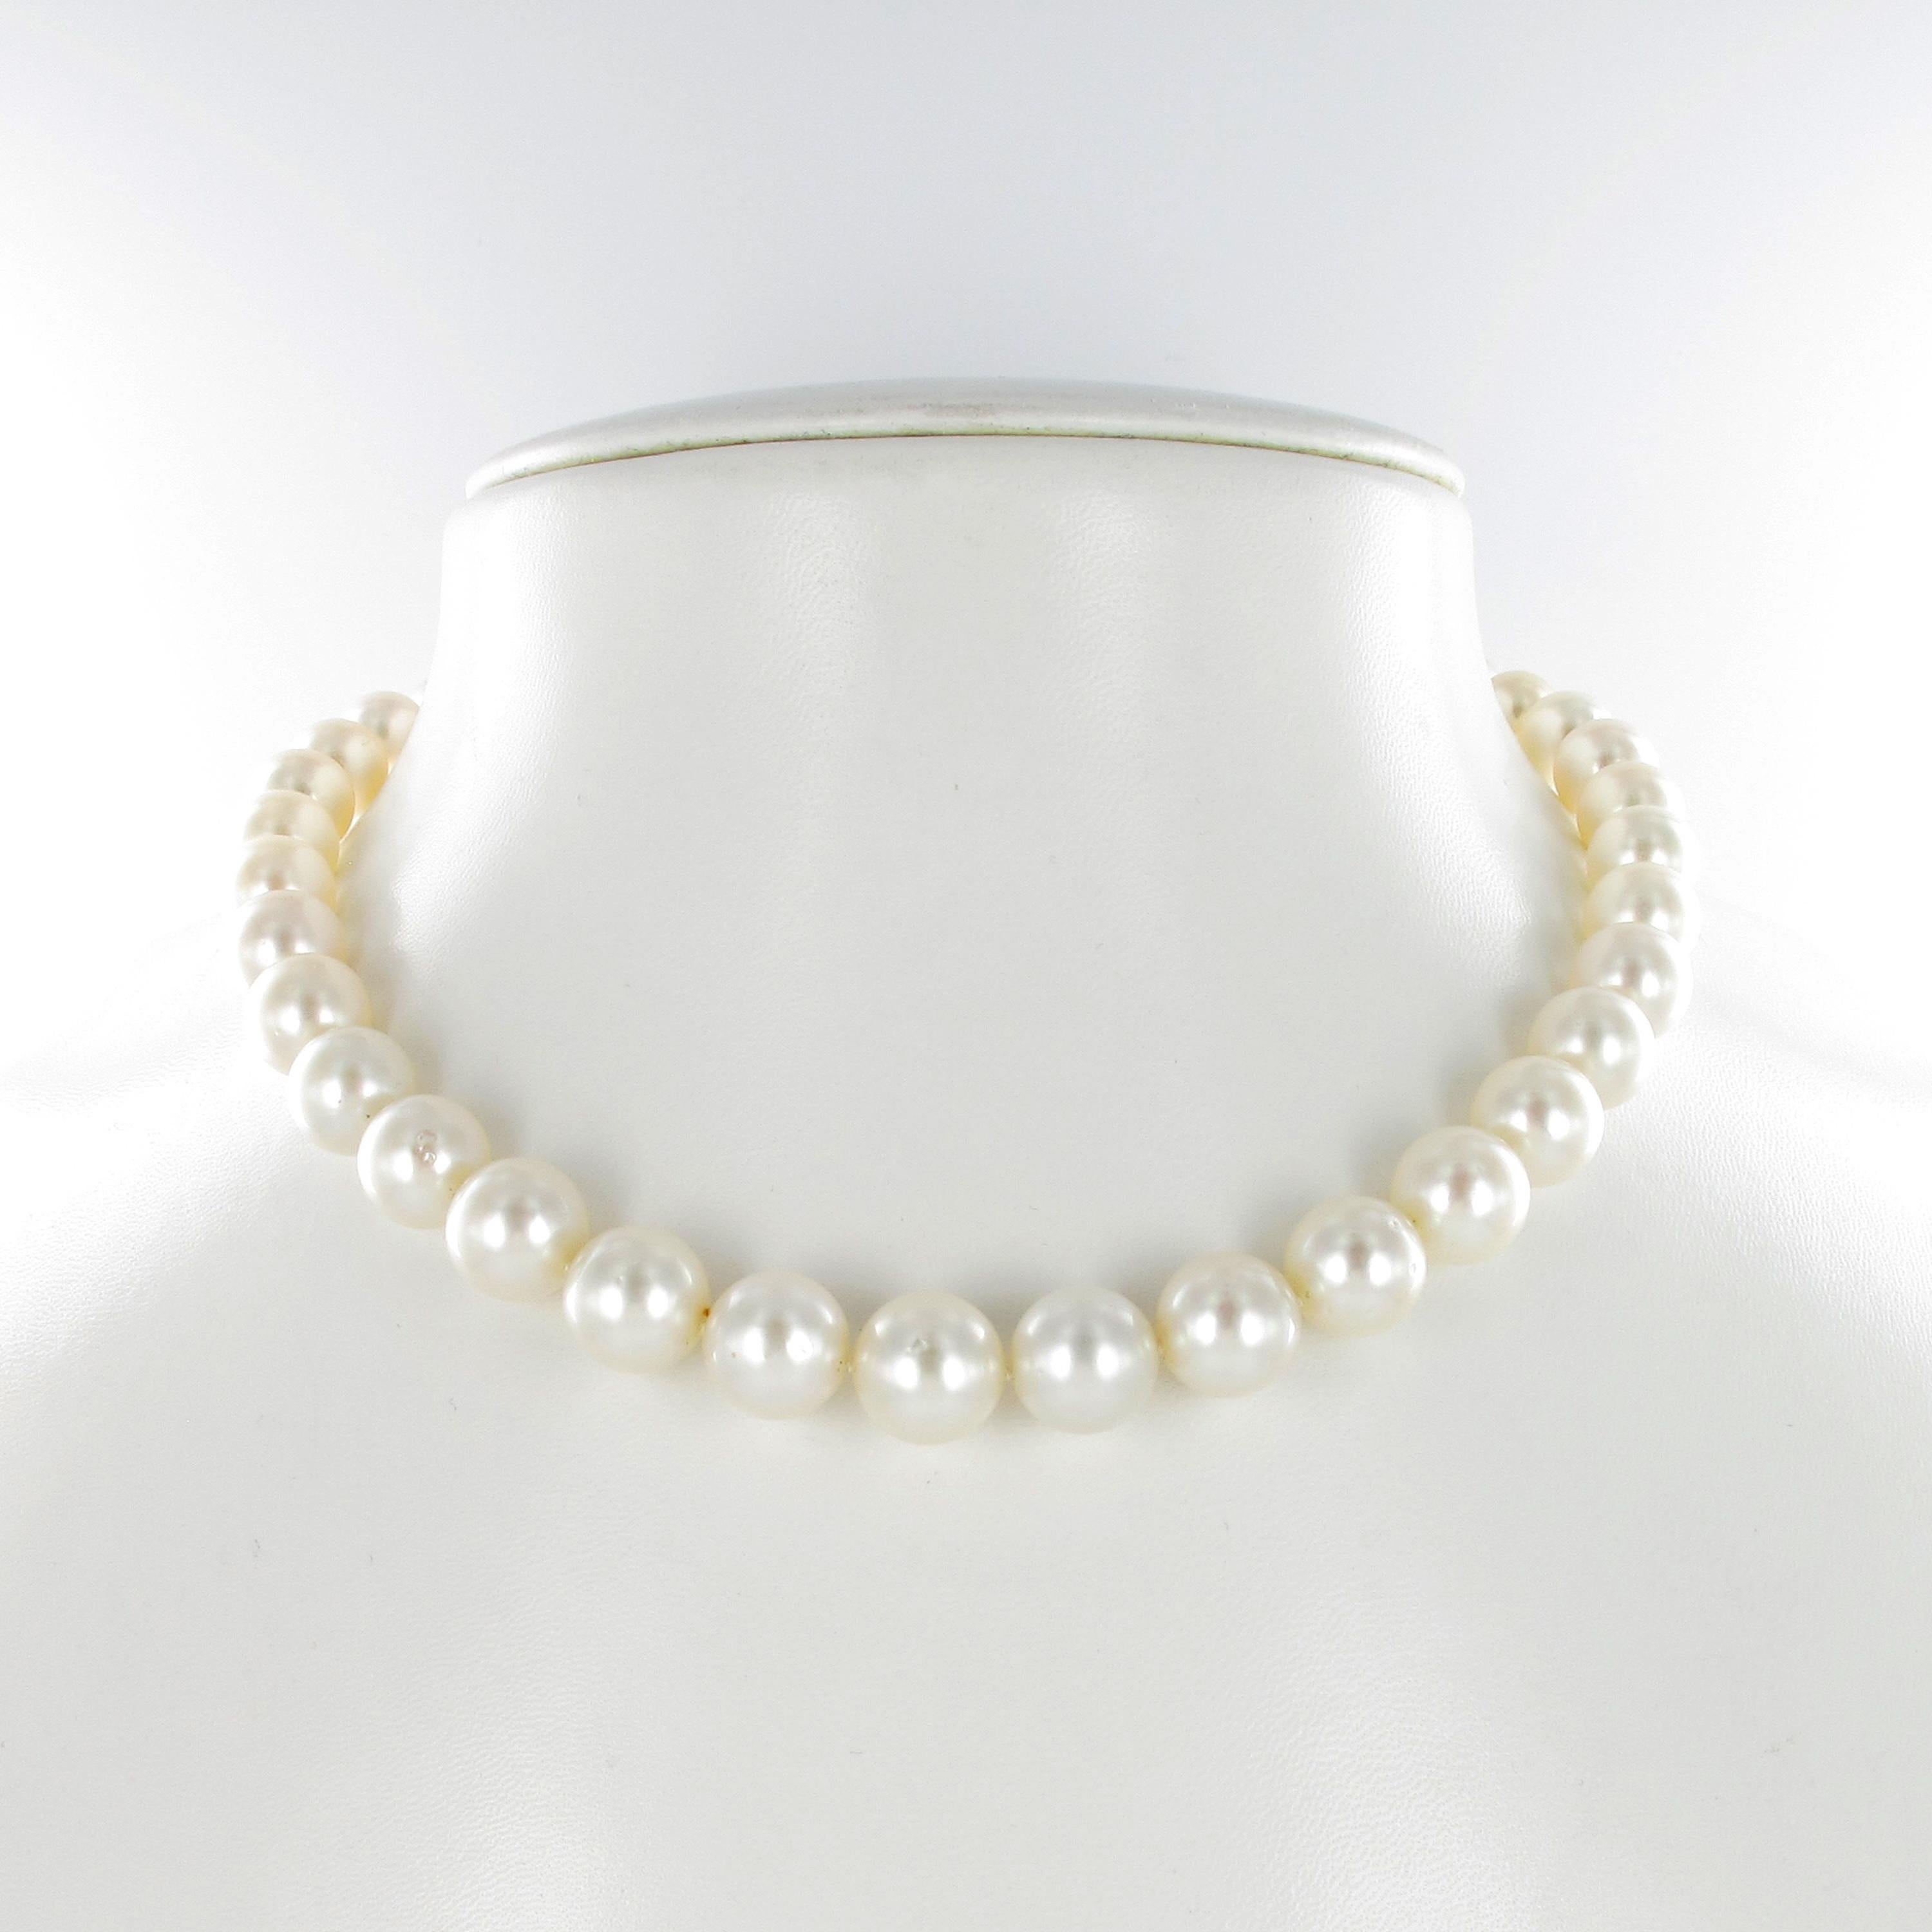 This strand consists of 38 slightly cream colored round South Sea cultured pearls from 9.1 mm to 12.0 mm, good luster.
The ball clasp is manufactured in 18 karat polished yellow gold. 

Accompanied by Gubelin GemLab Report No. 14010176
Length: 42.0